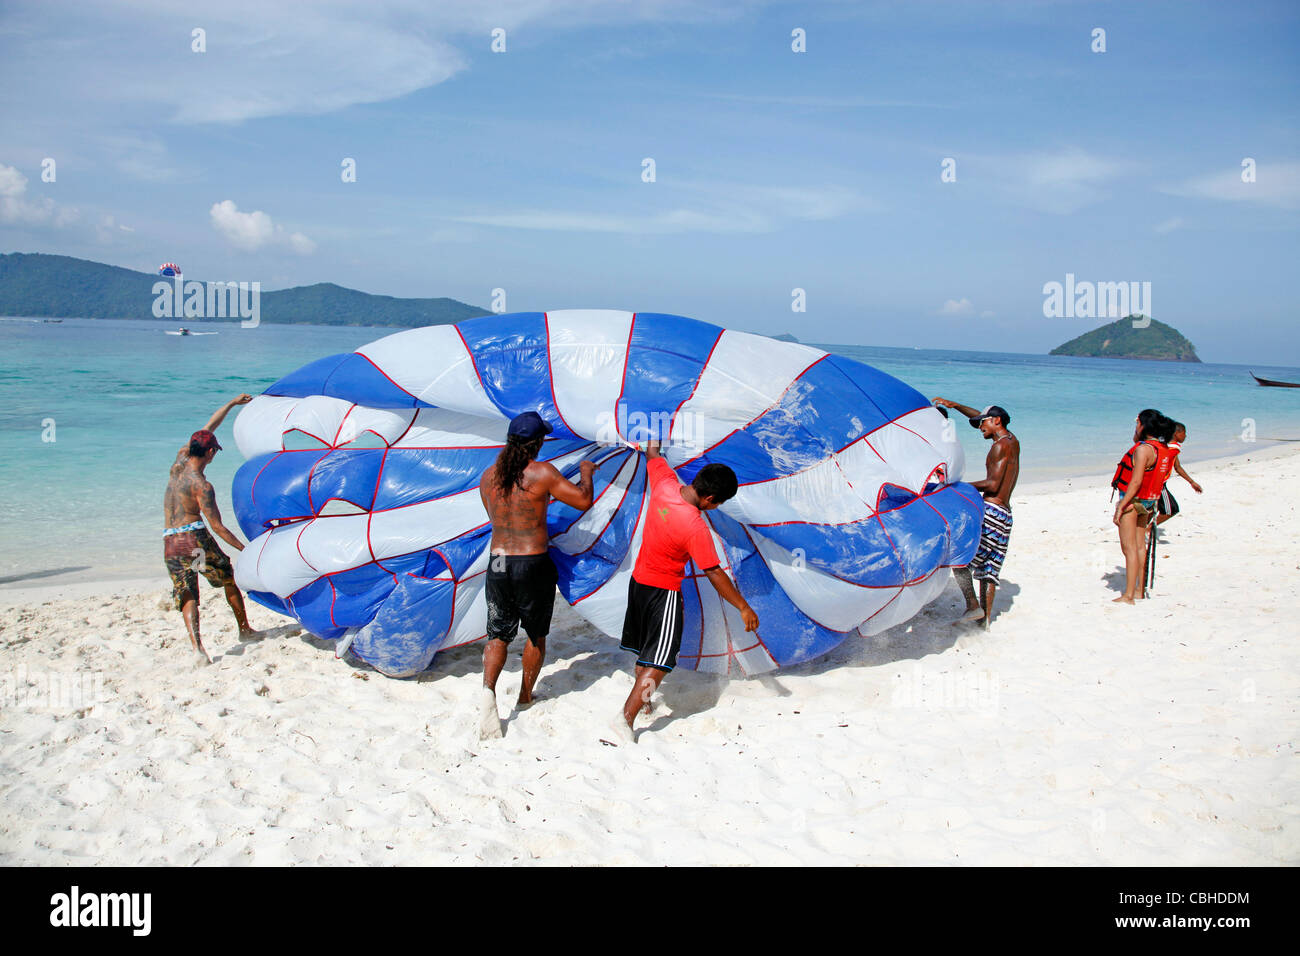 Tourists enjoying sport activities, parasailing with a speedboat and parachute on Coral Island, Phuket, Thailand Stock Photo